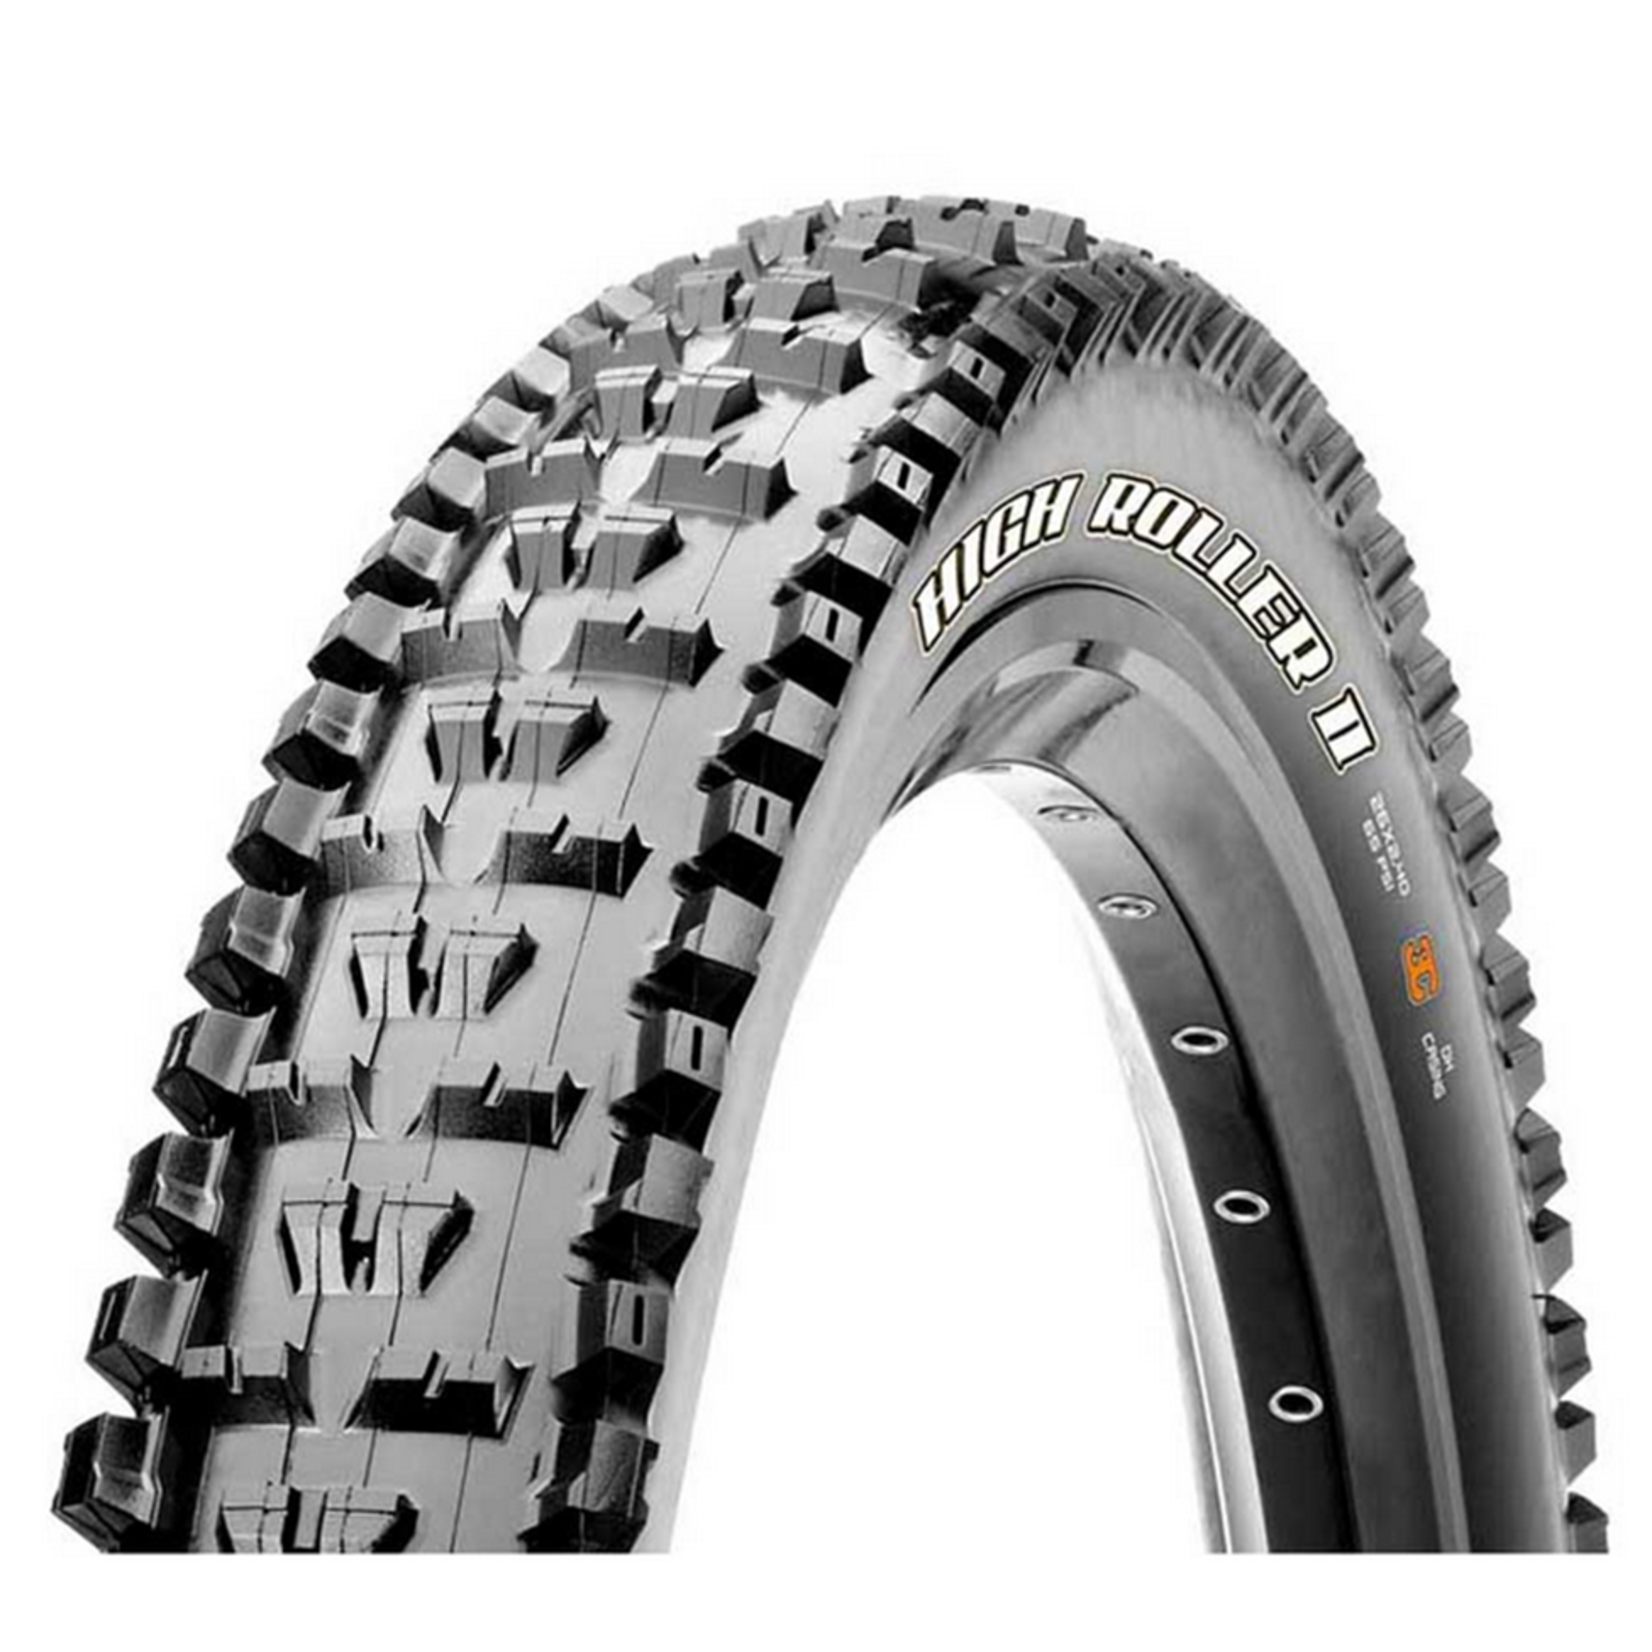 Maxxis Maxxis High Roller II Tubeless Tires 29"